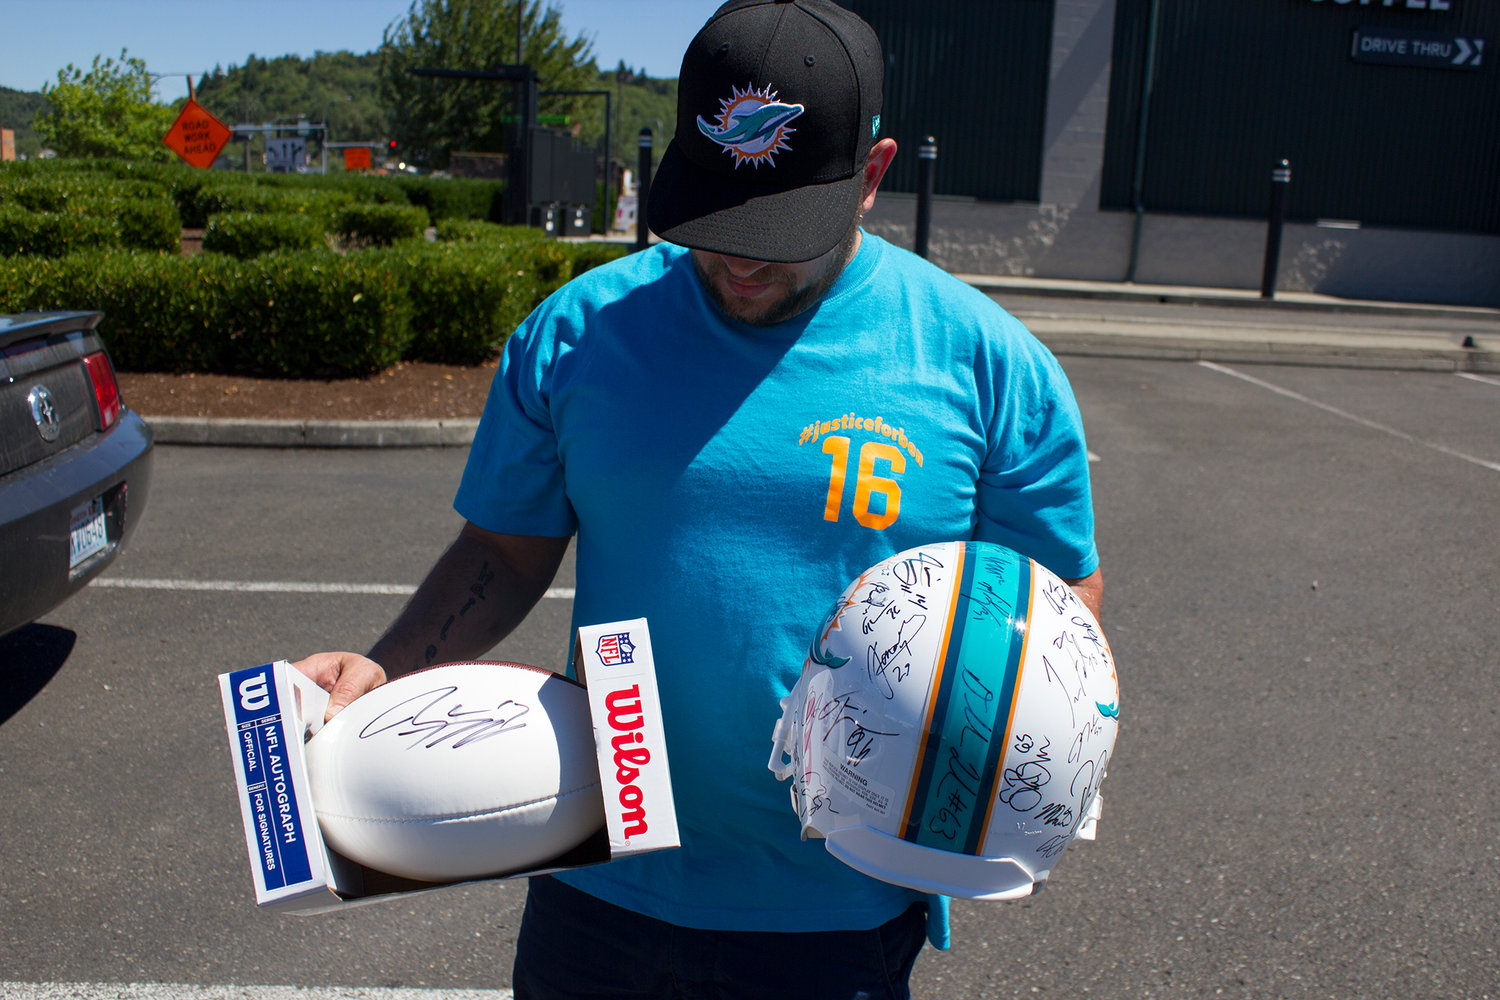 B.j. Eastman discusses his gifts from the Miami Dolphins on Wednesday afternoon in Chehalis.